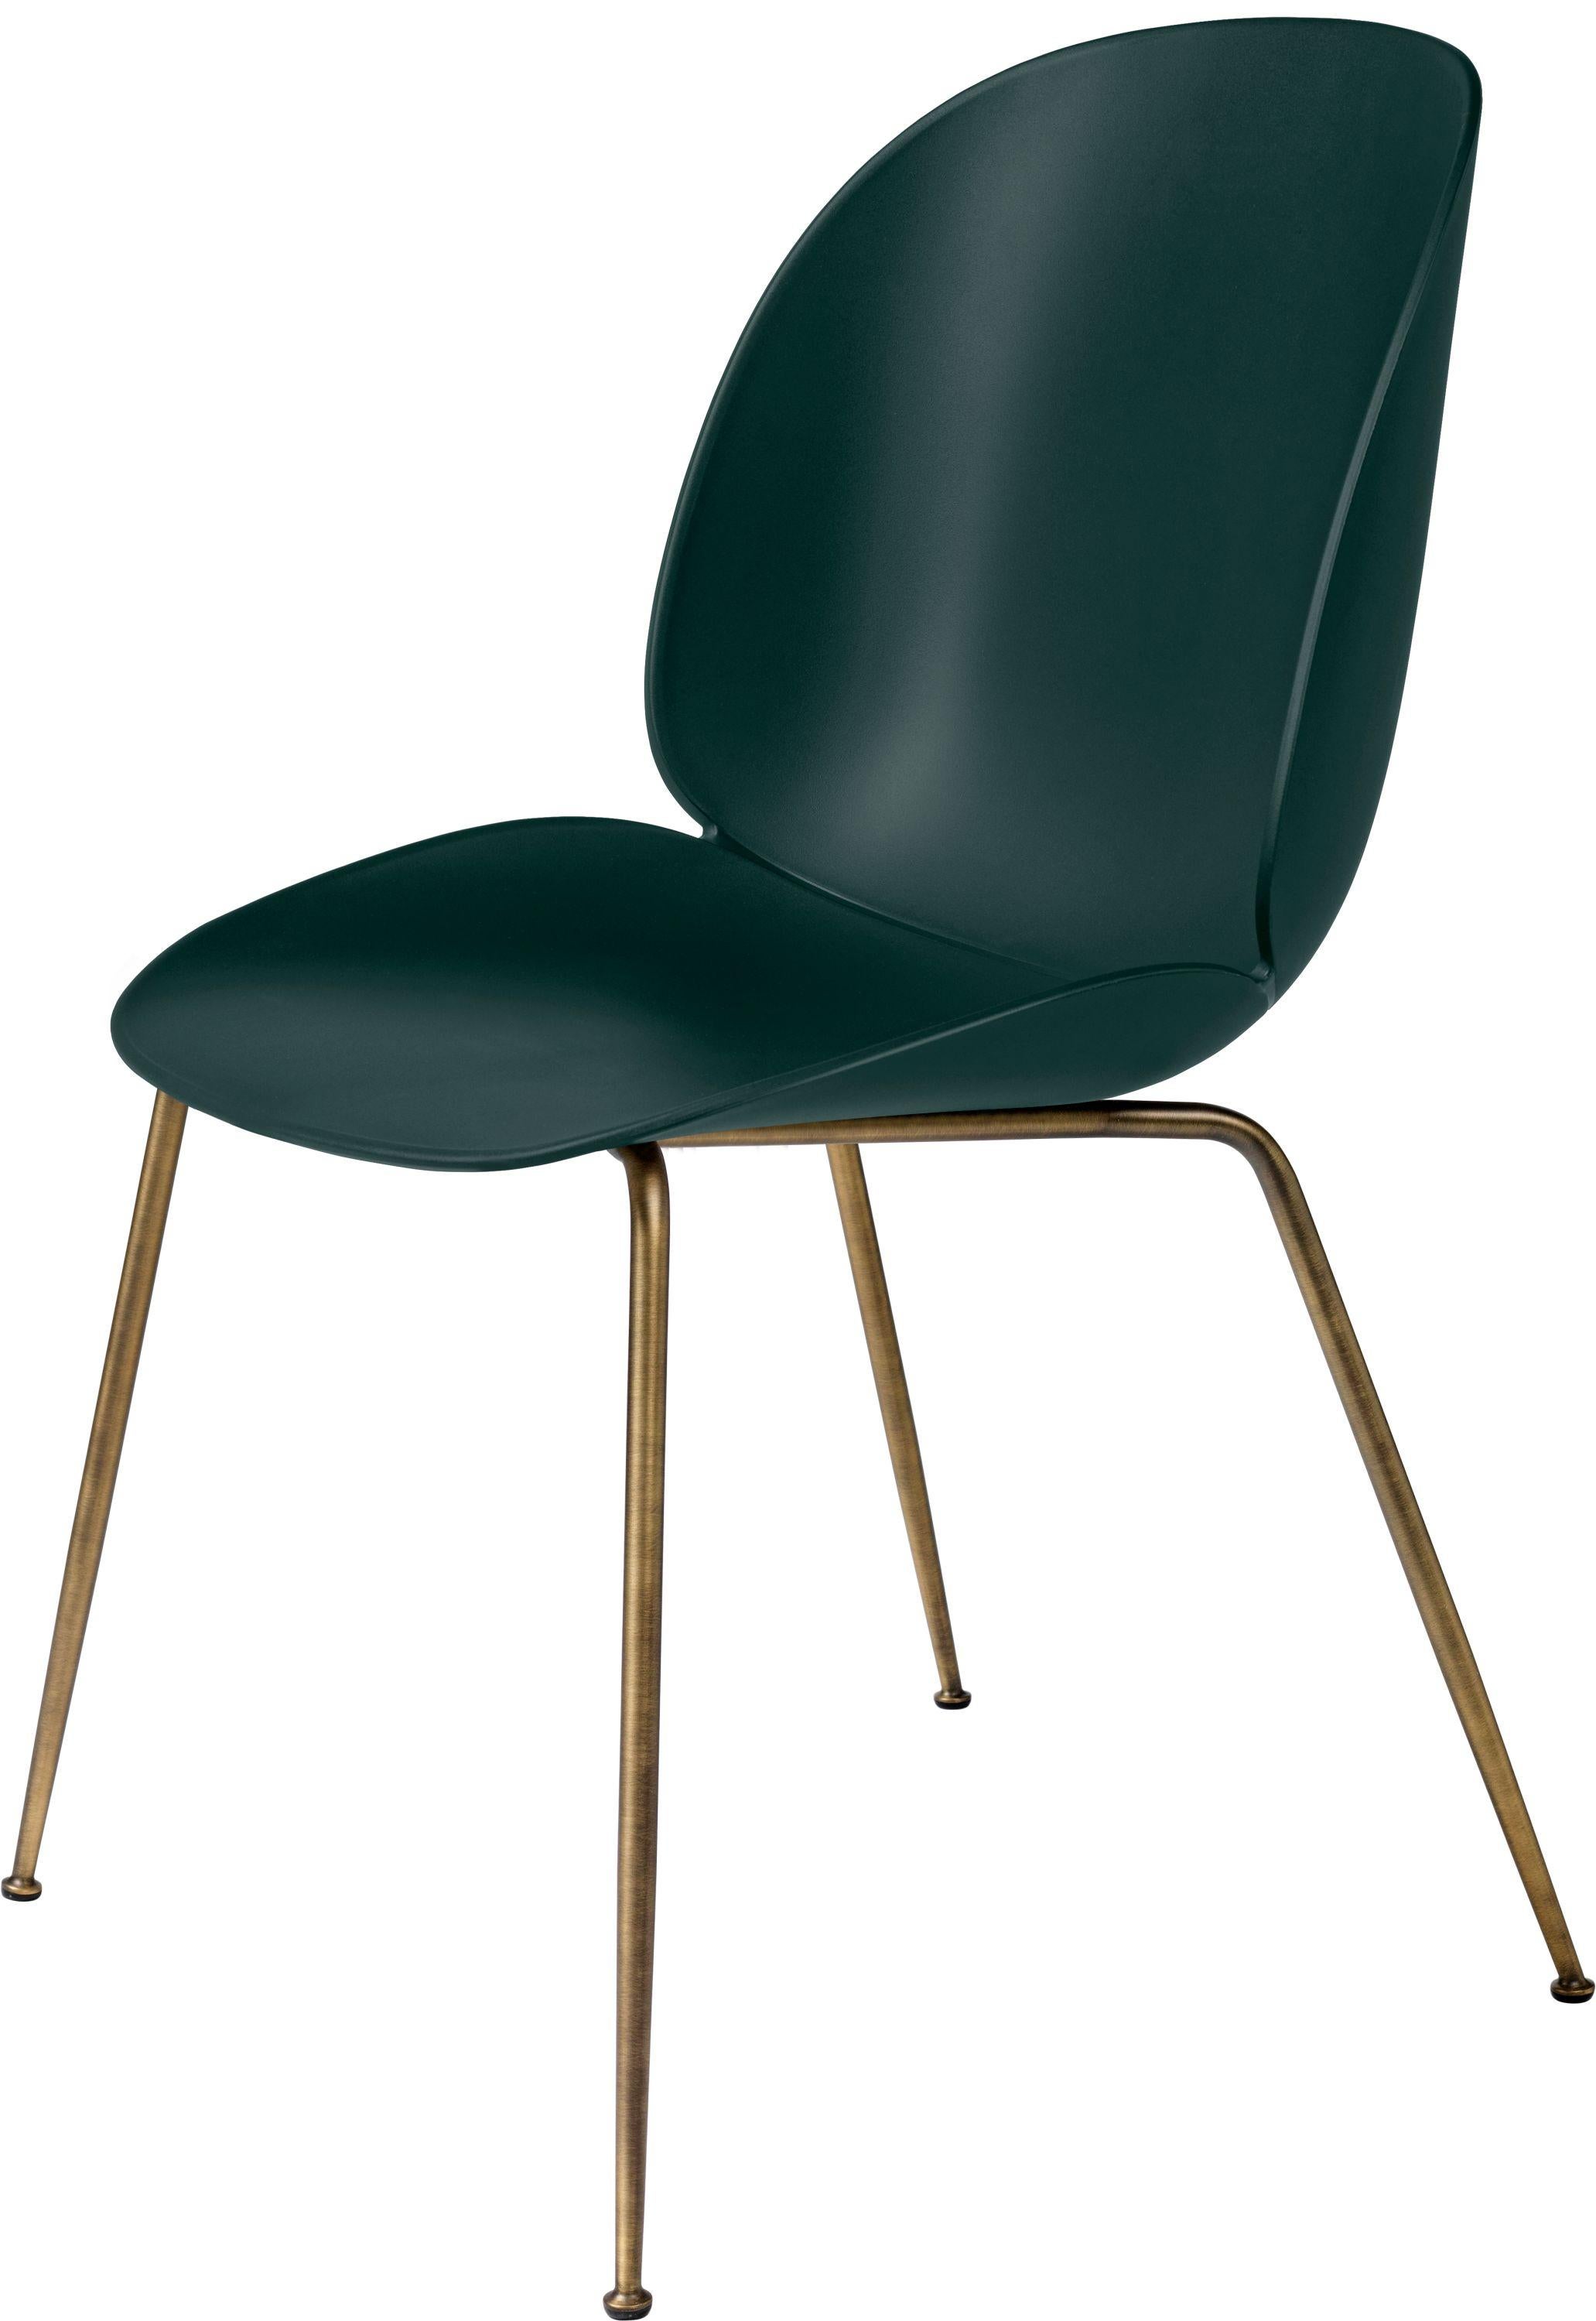 Mid-Century Modern GamFratesi 'Beetle' Dining Chair with Antique Brass Conic Base